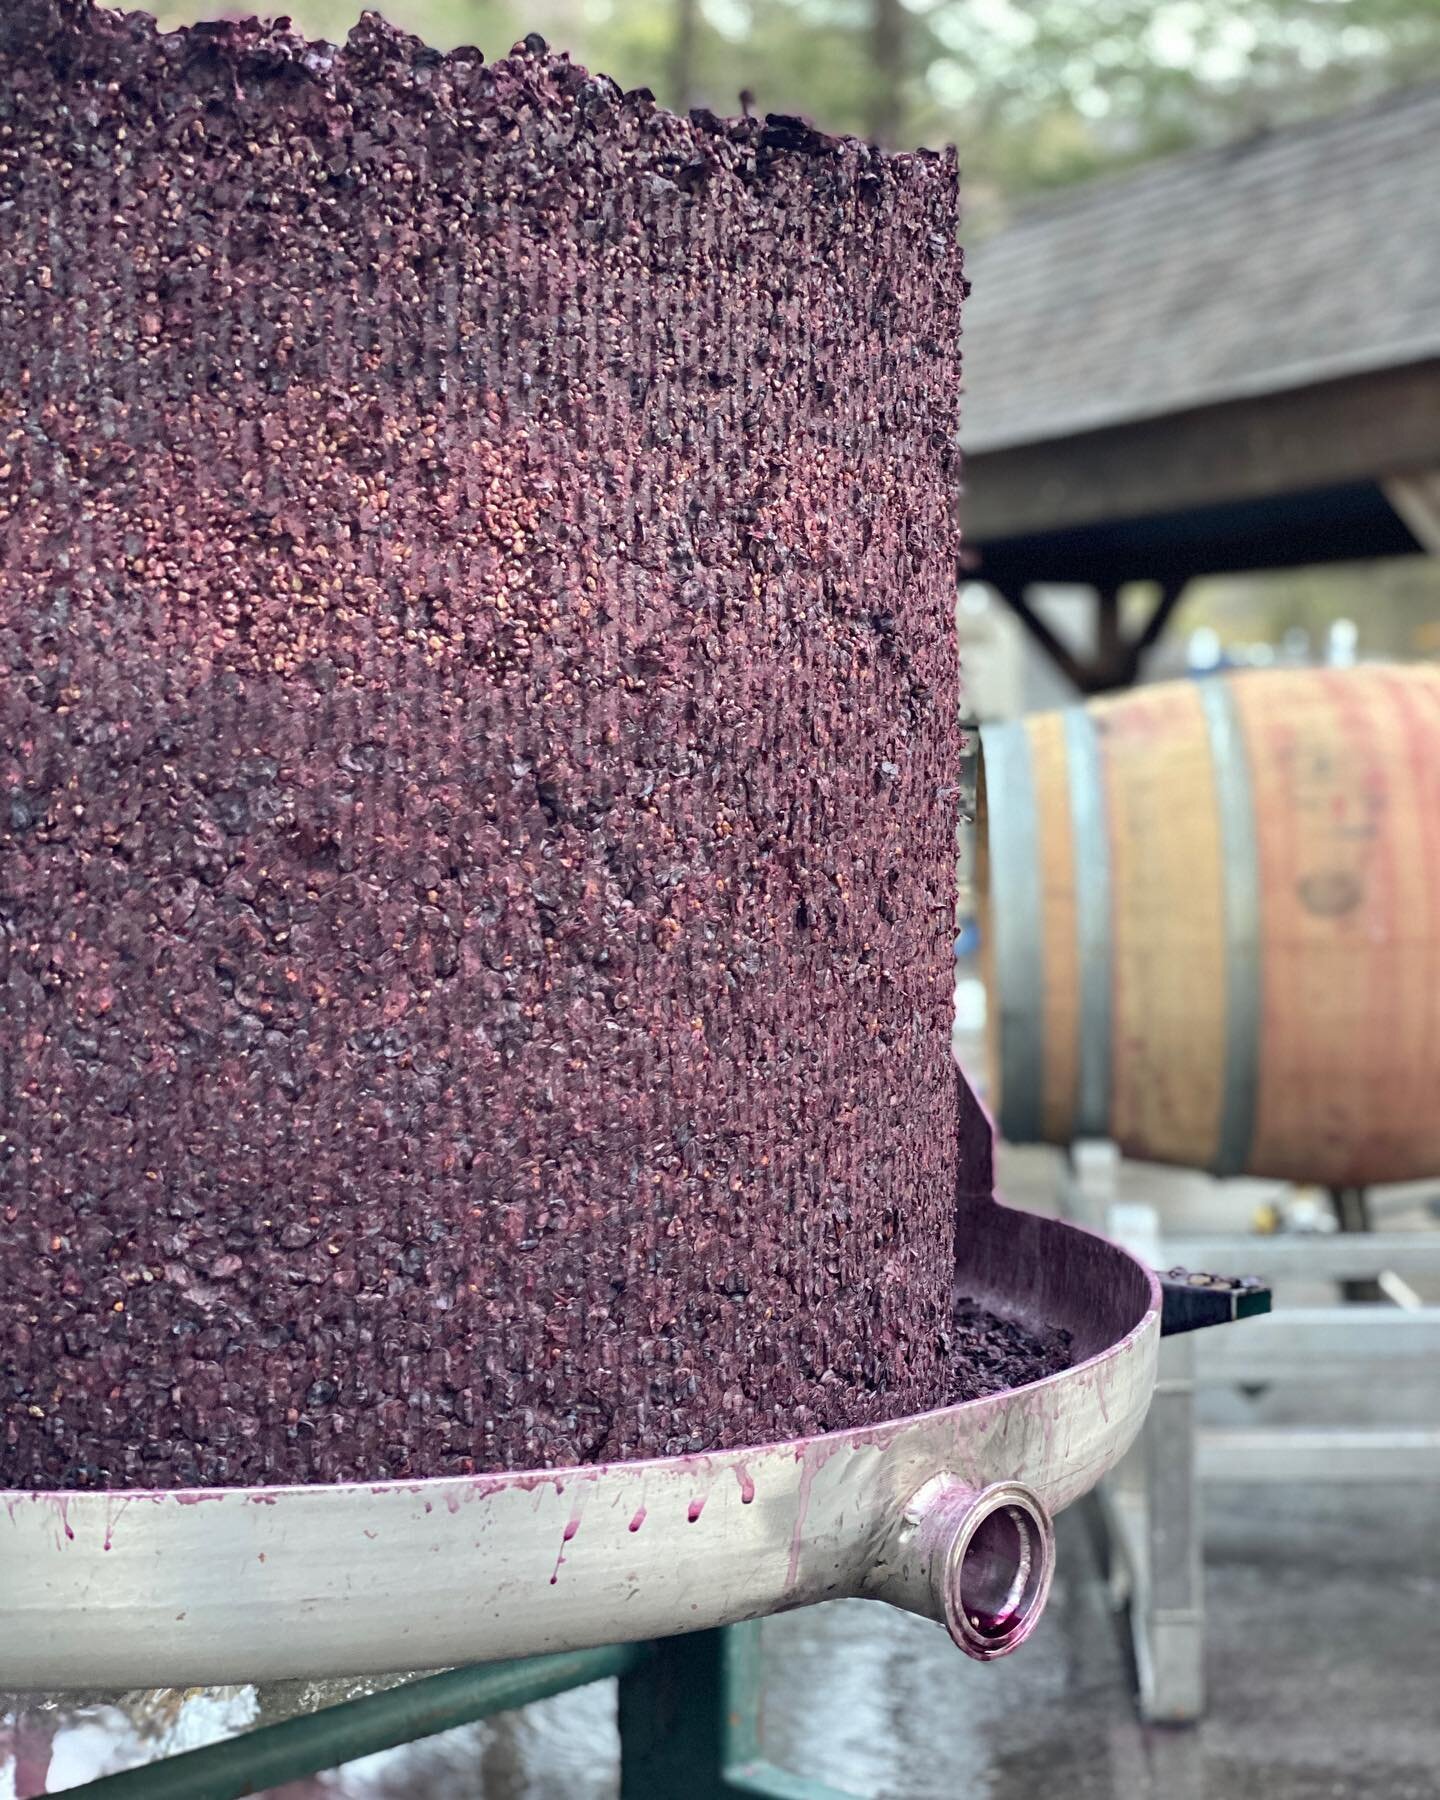 The sweetest, most beautiful cake! Last pressload of the 2022 vintage is done and my newest wines are all safely down to barrel. First year of my winemaking career that I am done before Halloween, courtesy of our extreme heat spell during Labor Day w